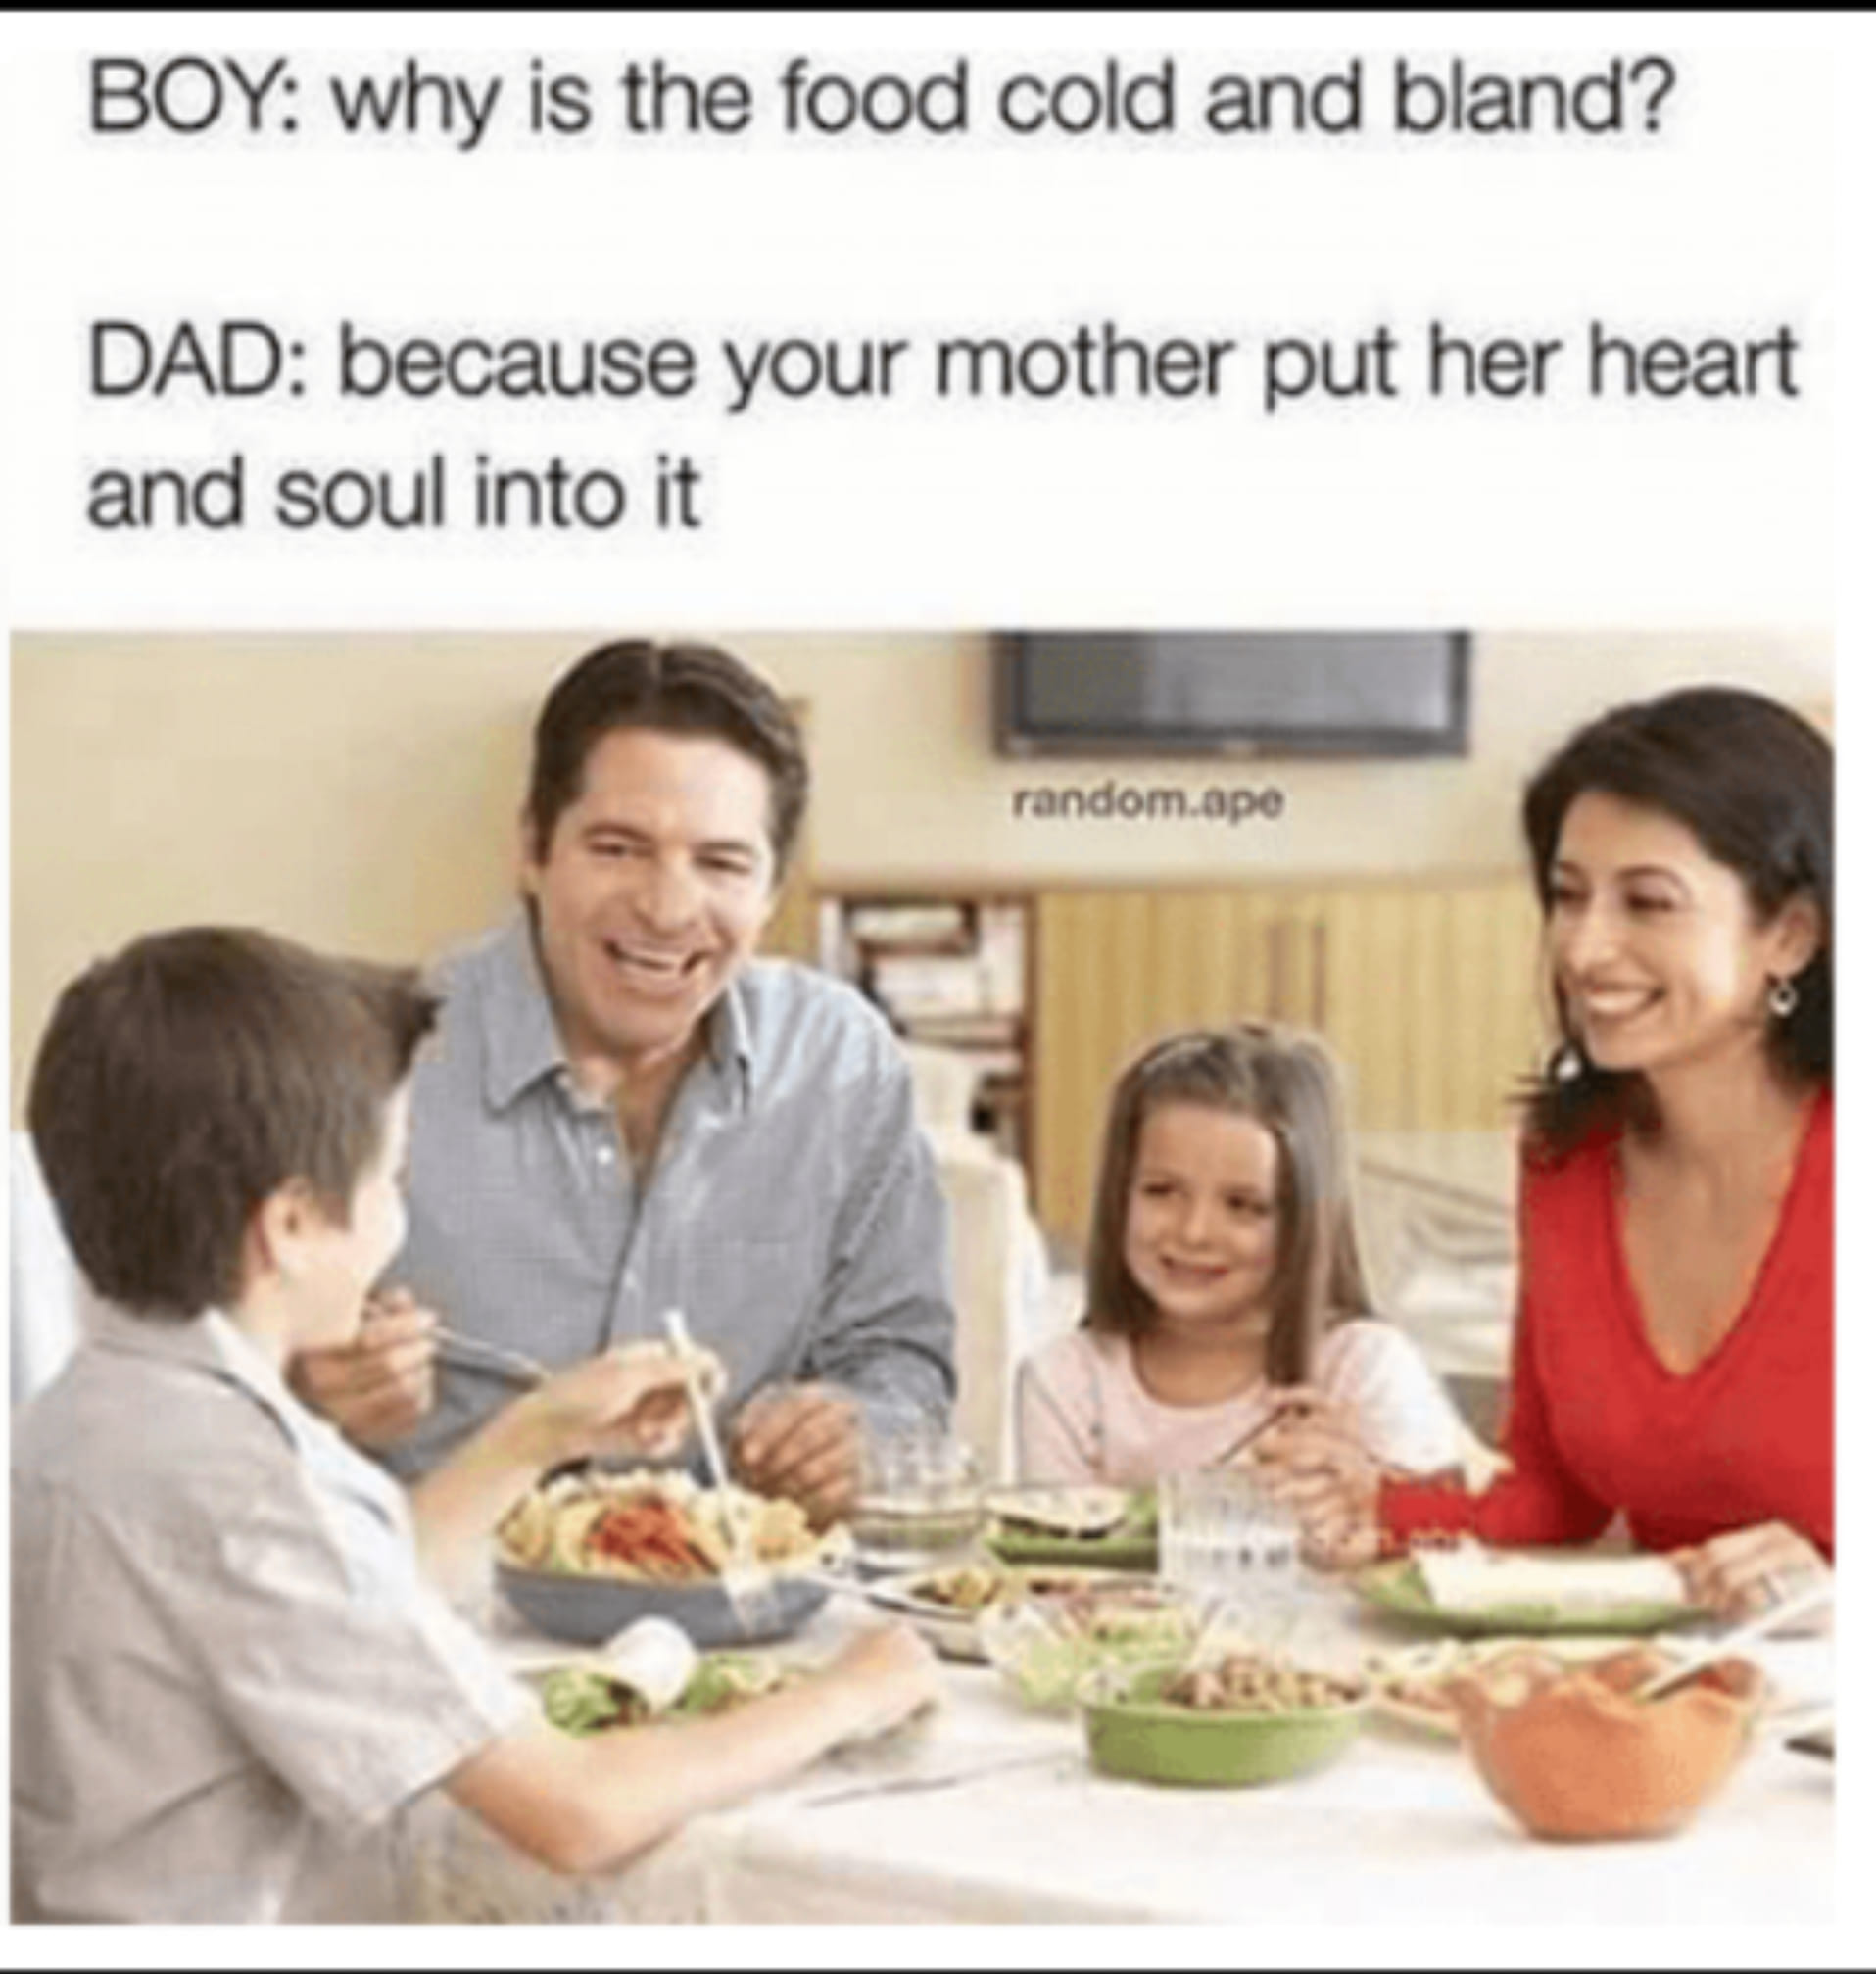 why is the food cold and bland, because your mother put her heart and soul into it